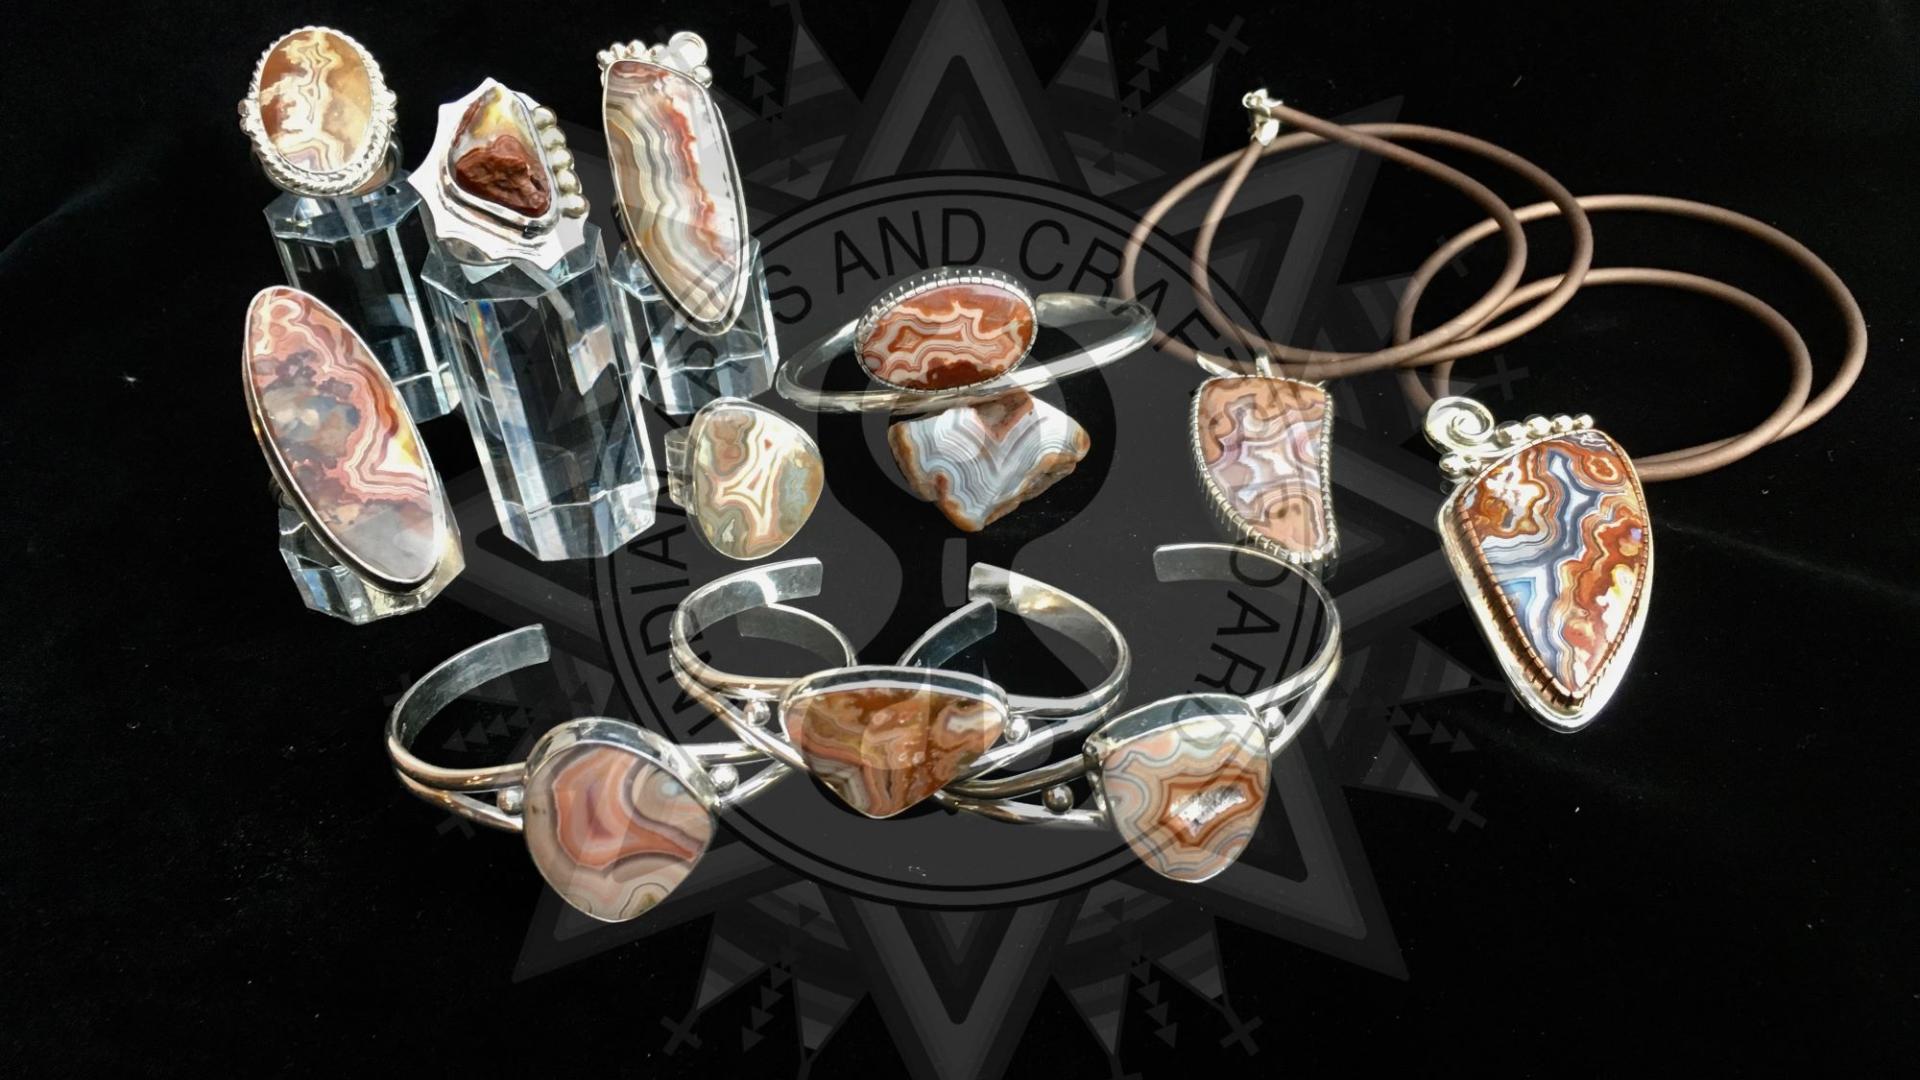 Photograph of silver and agate bracelets and other jewelry.